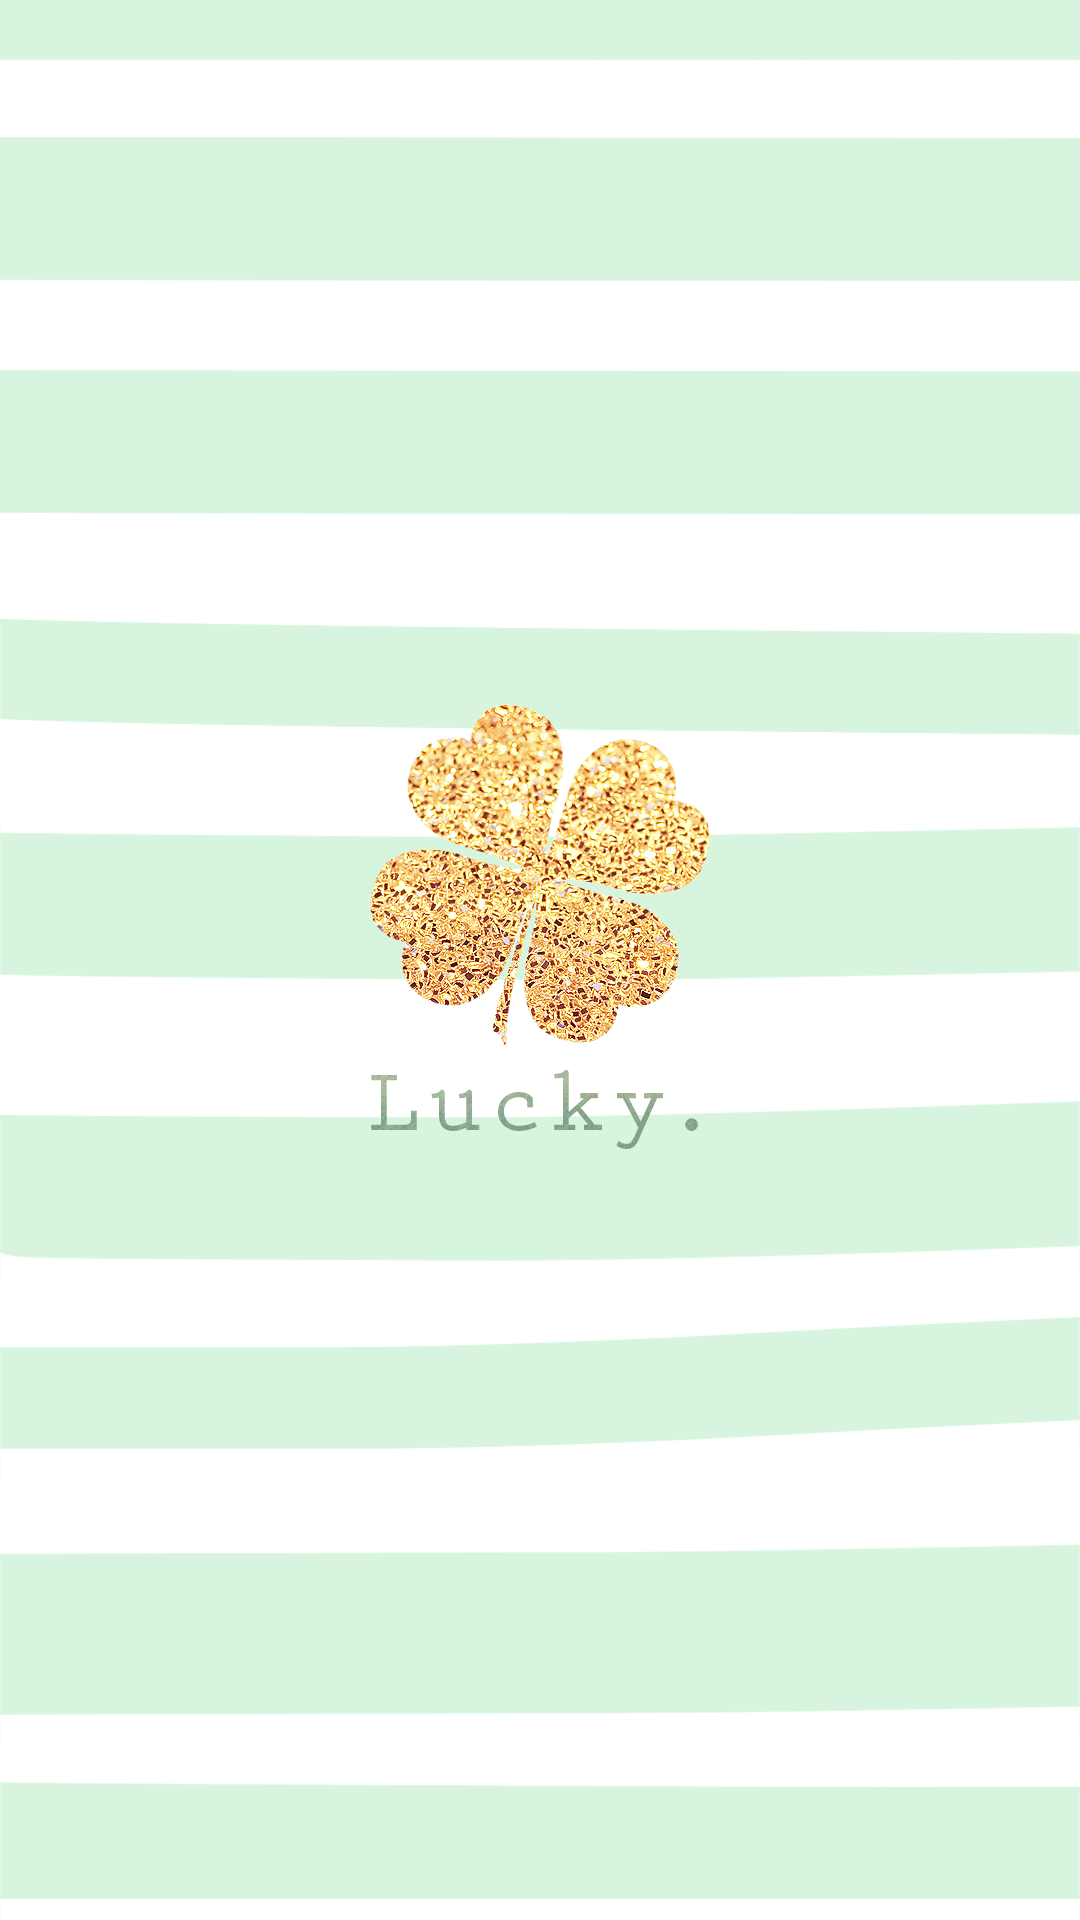 HD Phone Wallpaper Lucky Gold Glitter Four Leaf Clover By